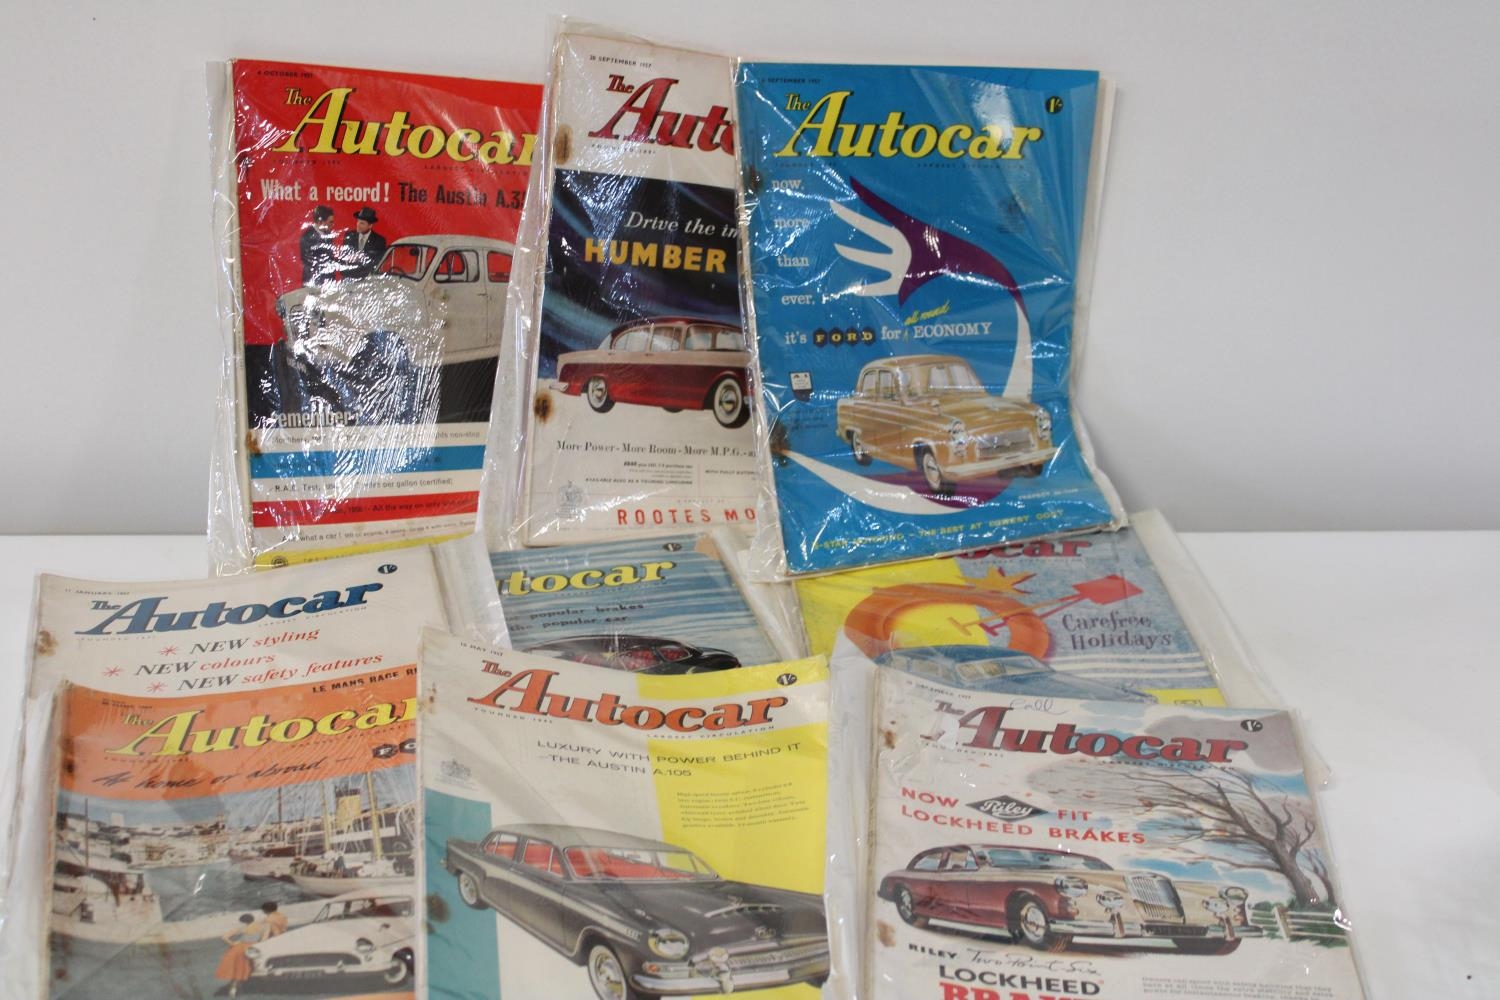 A job lot of Autocar magazines from 1957